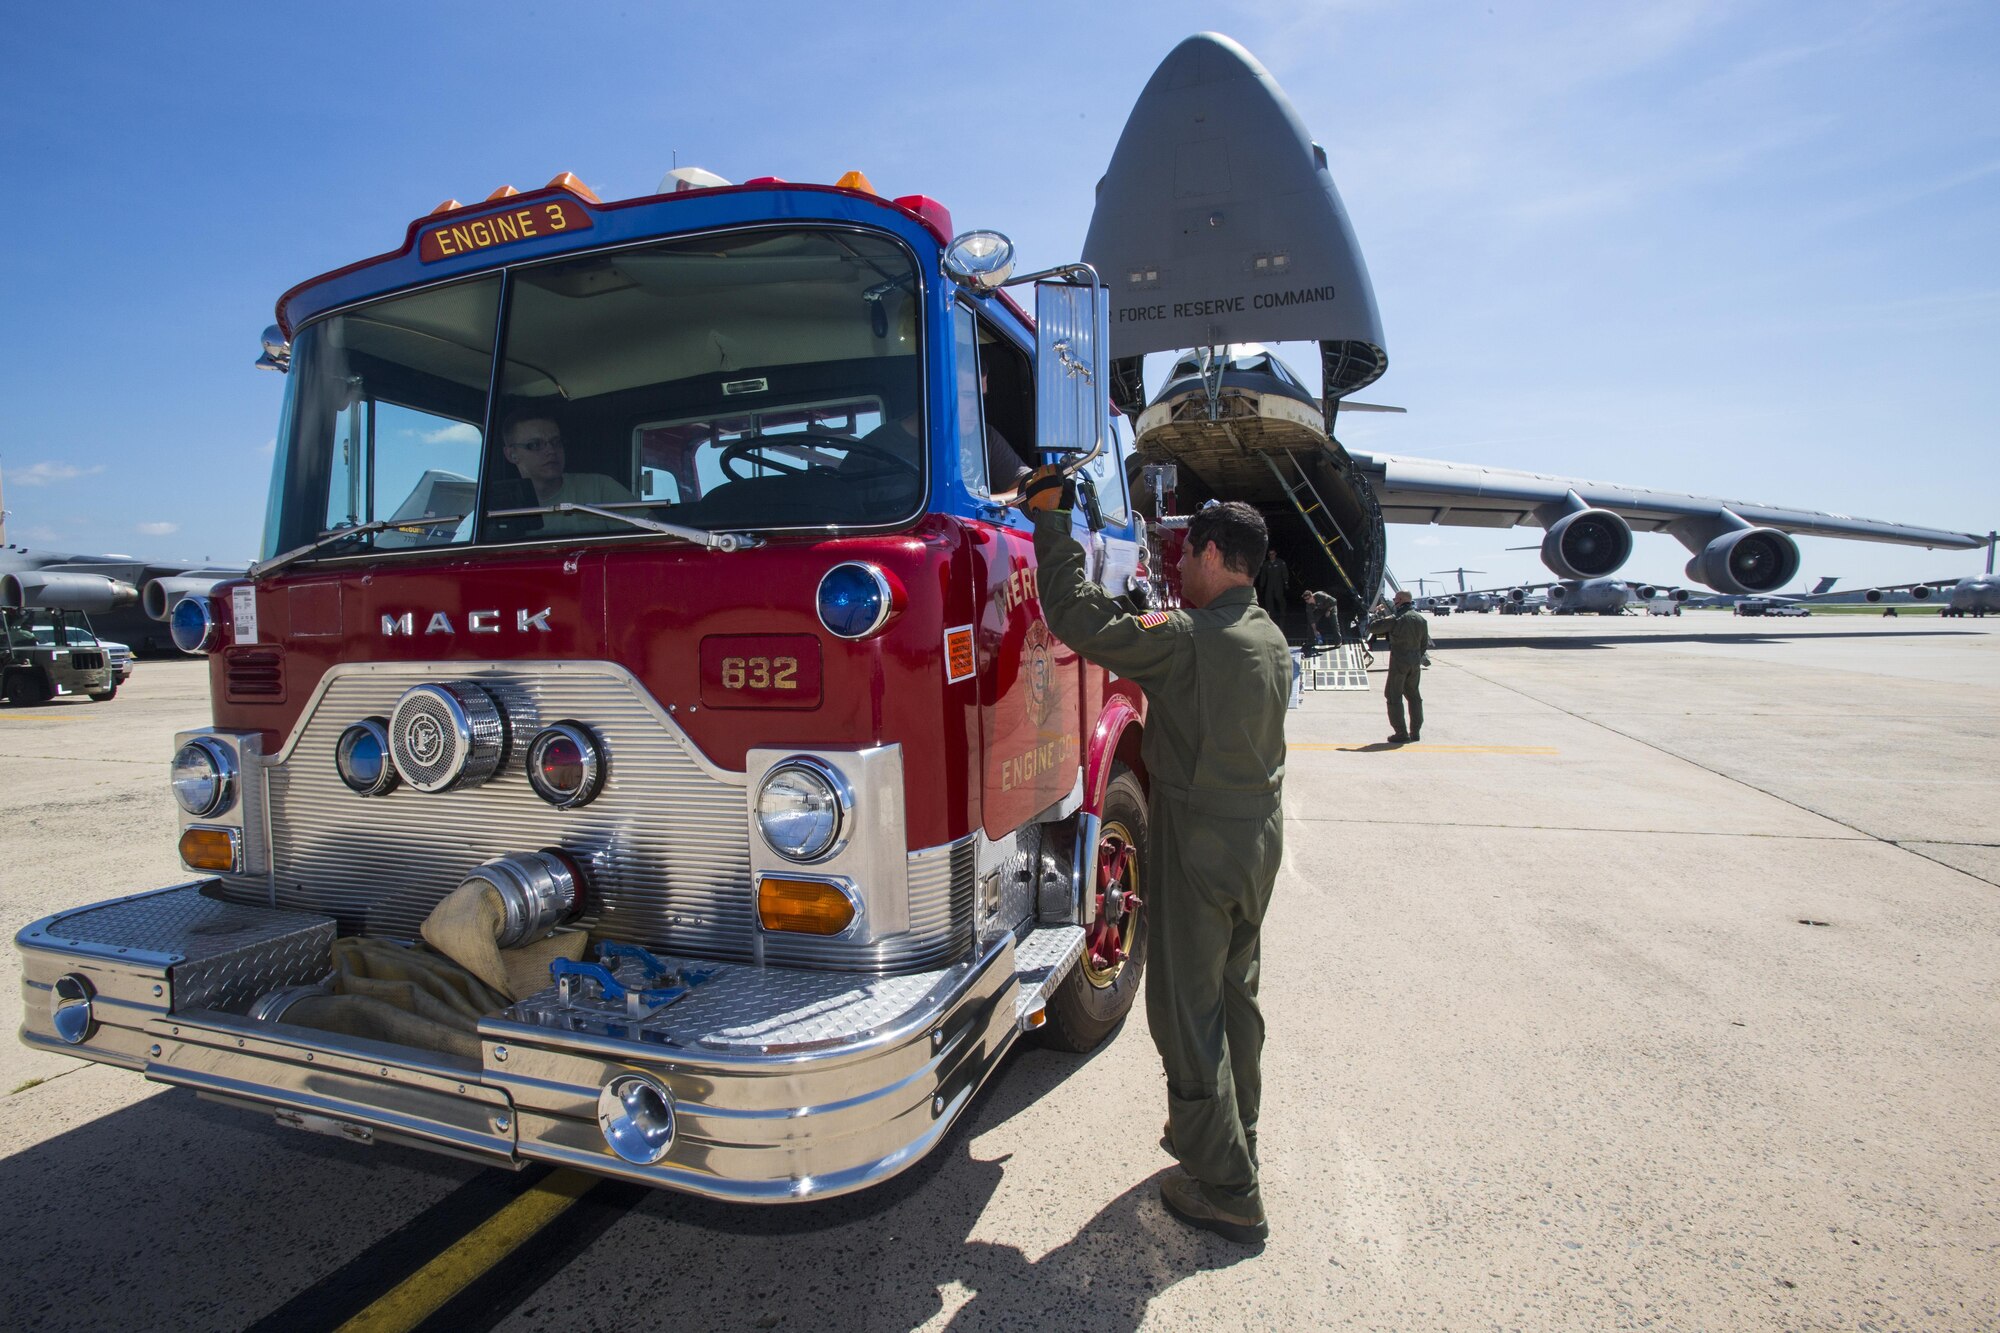 Loadmasters, with the 439th Airlift Wing, load a 1982 Mack fire truck onto a C-5B Galaxy at Joint Base McGuire-Dix-Lakehurst, New Jersey, on Aug. 12, 2016. Master Sgt. Jorge A. Narvaez, a New Jersey Air National Guardsman with the 108th Security Forces Squadron, was instrumental in getting the truck donated to a group of volunteer firefighters in Managua, Nicaragua. The truck donation is done through the Denton Program, which allows U.S. citizens and organizations to use space available on military cargo aircraft to transport humanitarian goods to countries in need. The 439th AW is located at Westover Air Reserve Base, Mass.